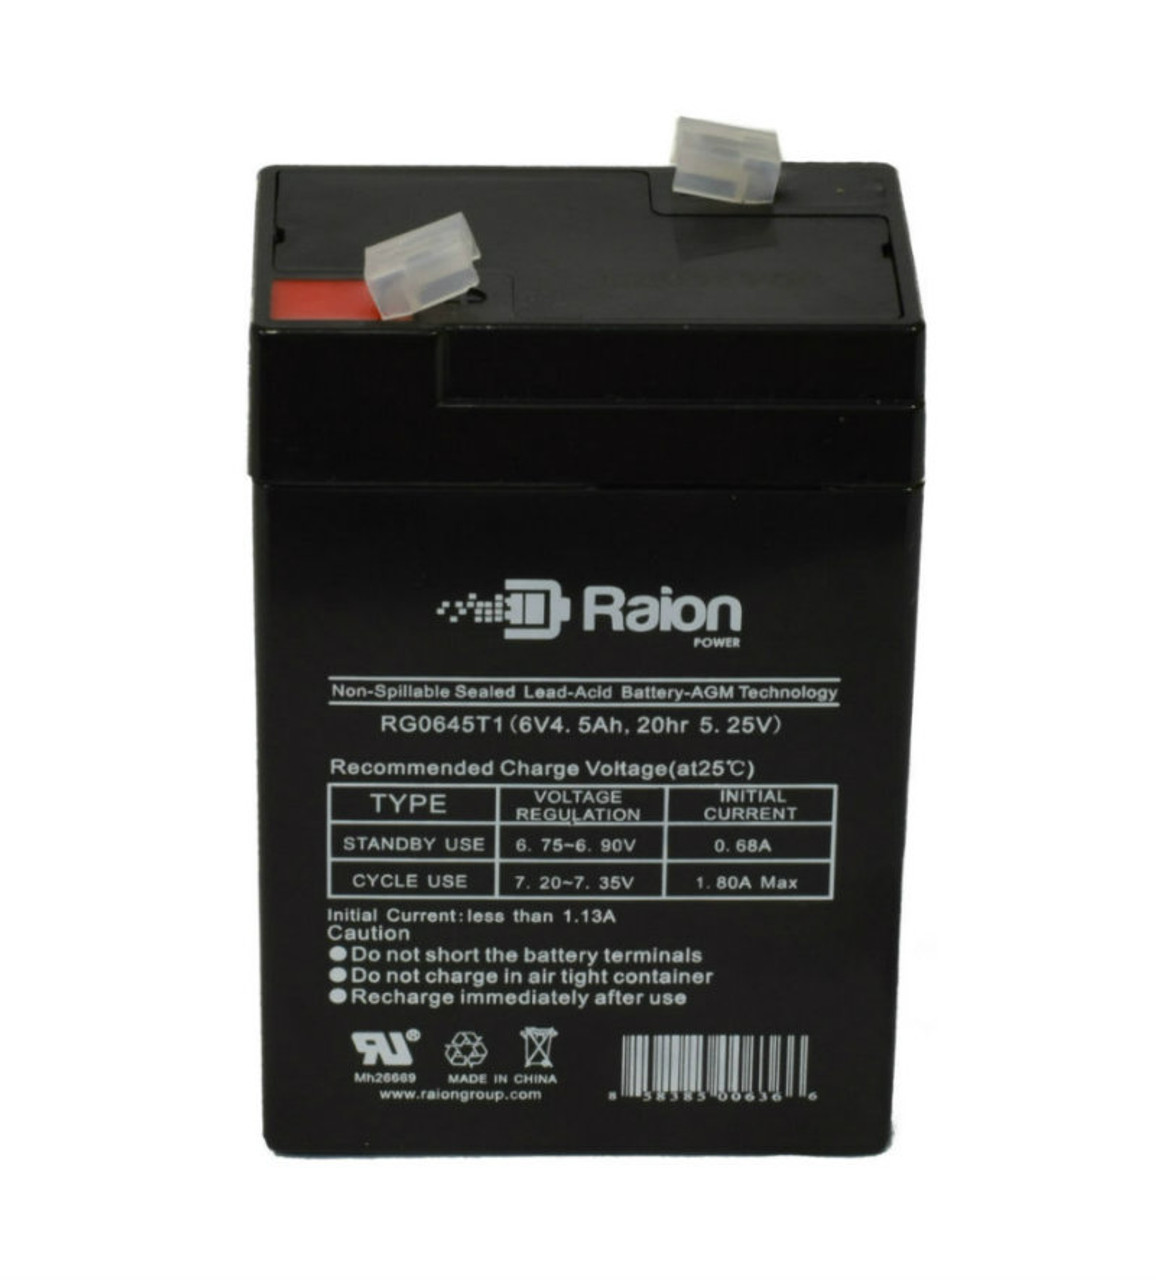 Raion Power RG0645T1 Replacement Battery Cartridge for Powerfit S306/4 S